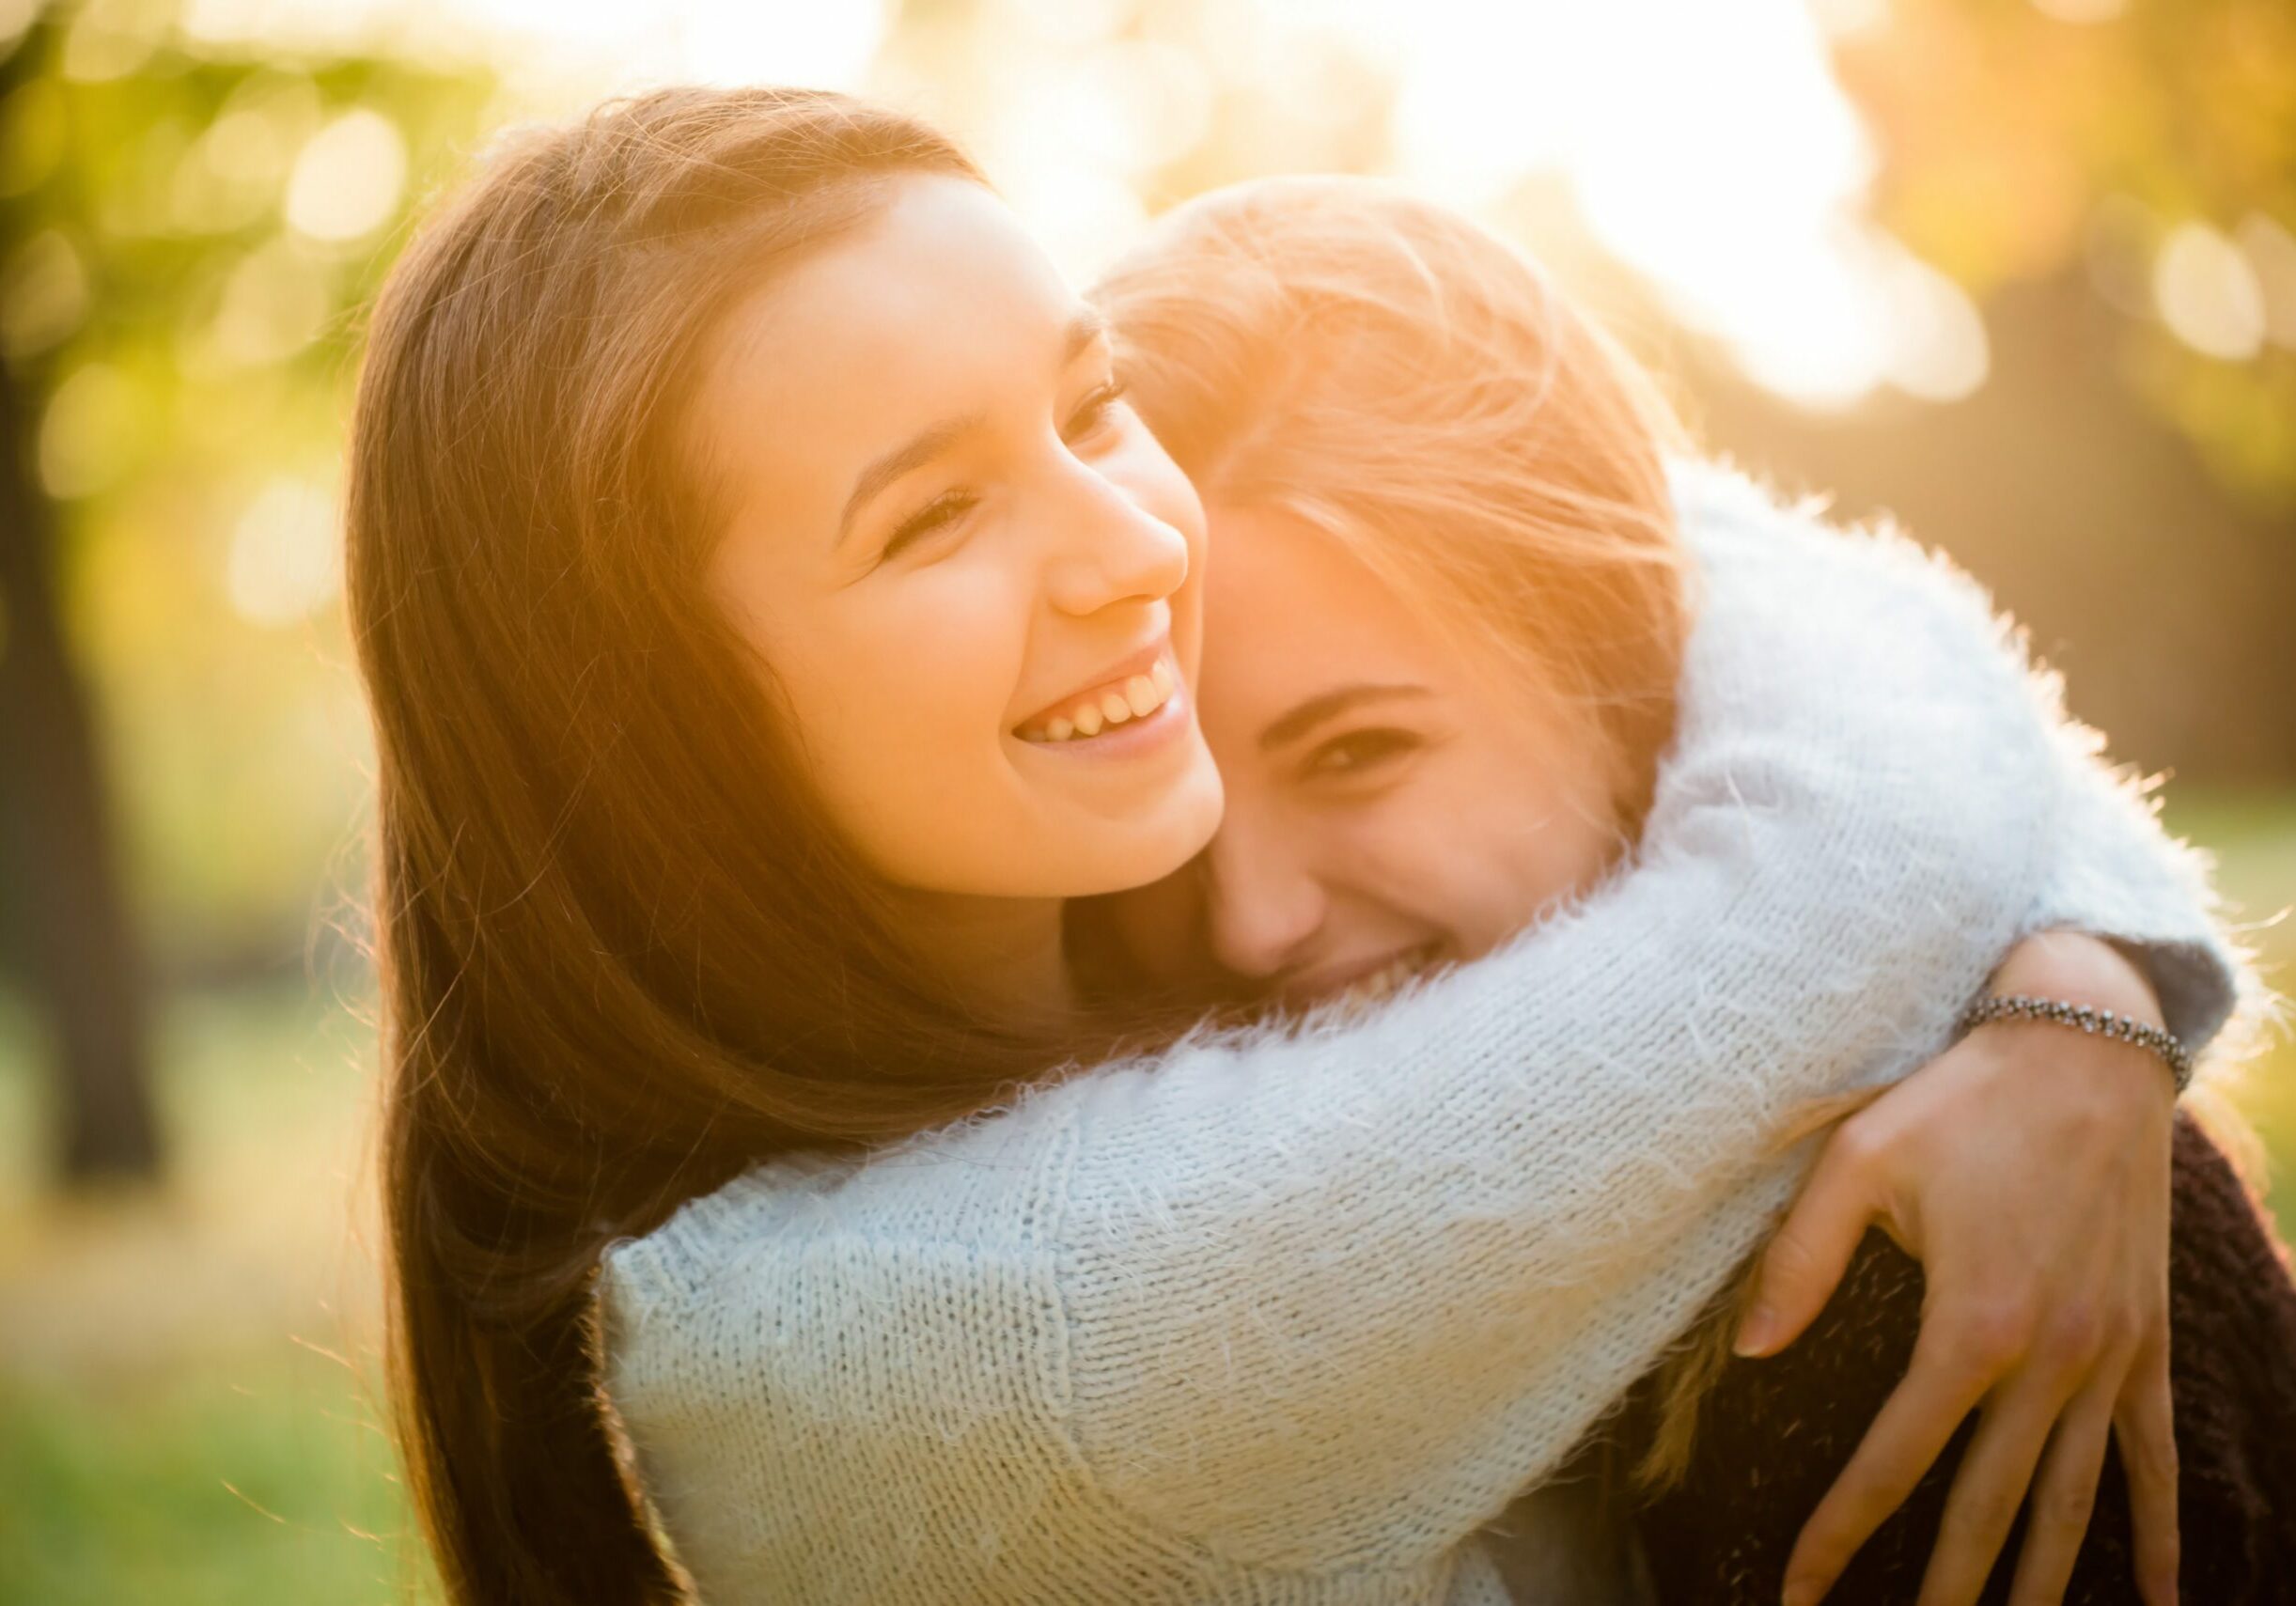 Two friends -  teenage girls hugging  outdoor in autumn at sunset